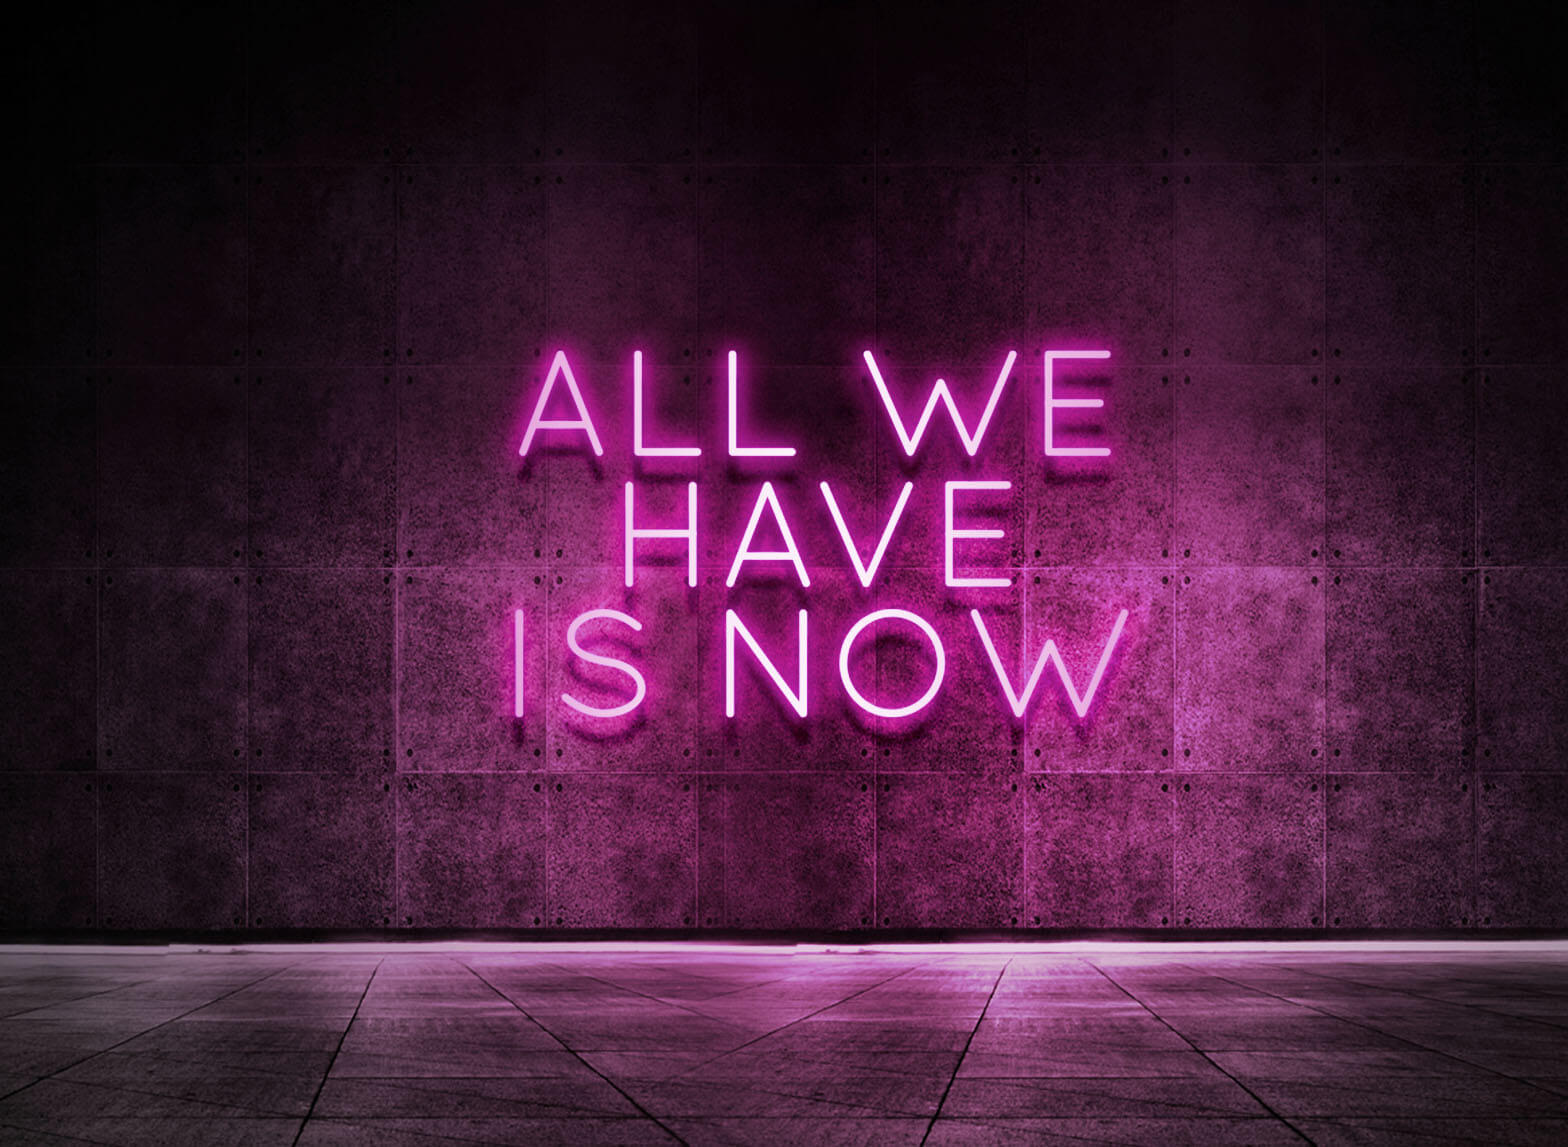 ALL WE HAVE IS NOW